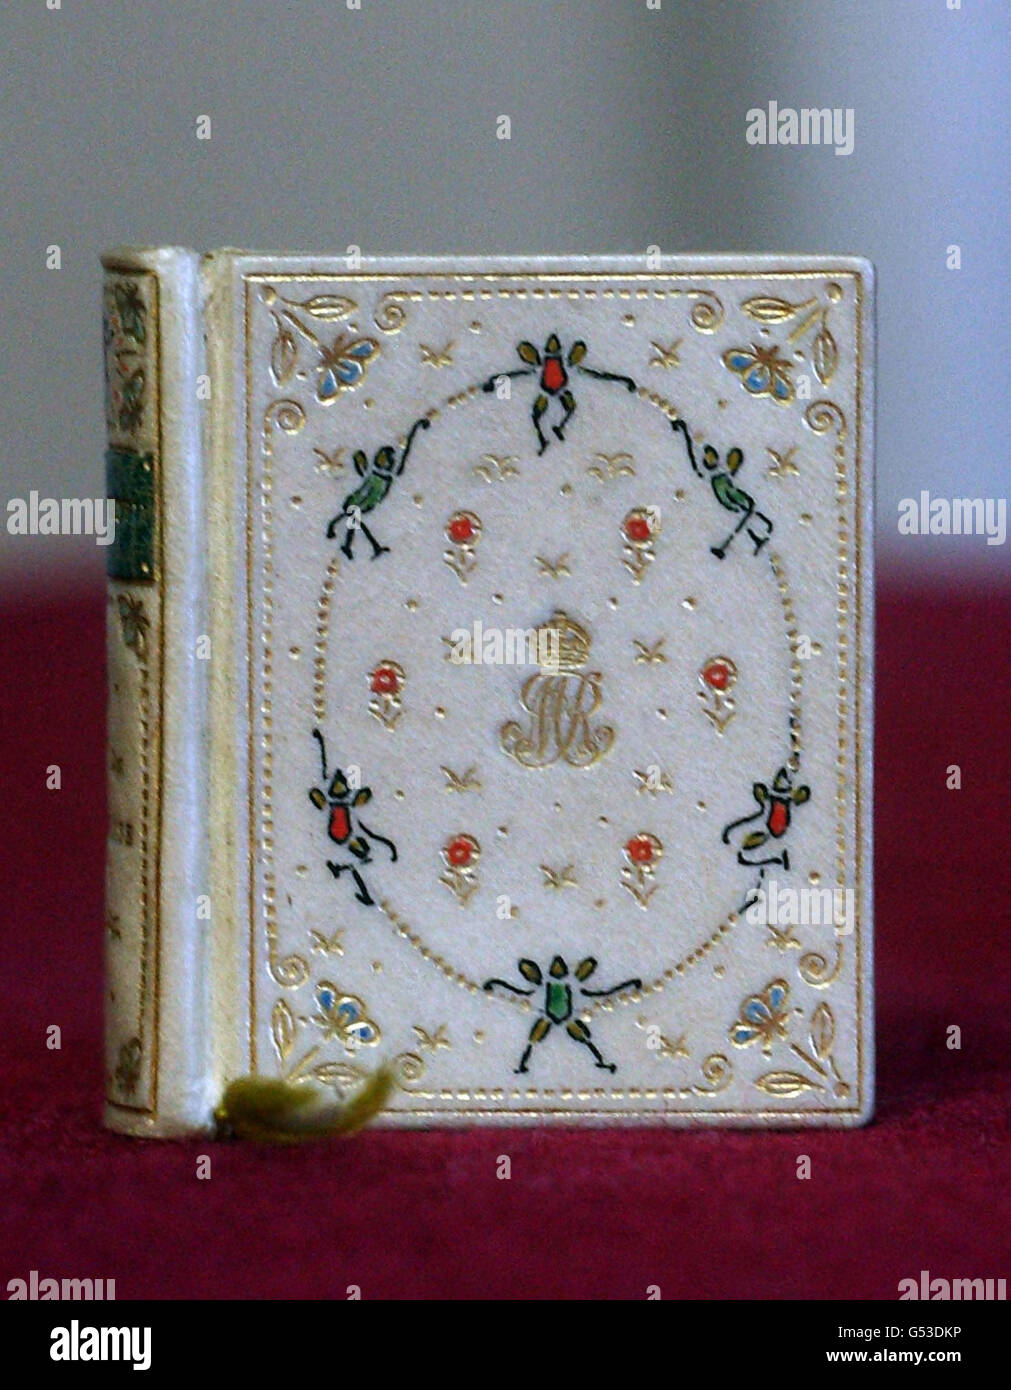 A miniature book made especially for Queen Mary's Dolls' House at Windsor Castle, which measures 4cm by 3.5cm containing a fairy story which has been reproduced for the first time. Stock Photo